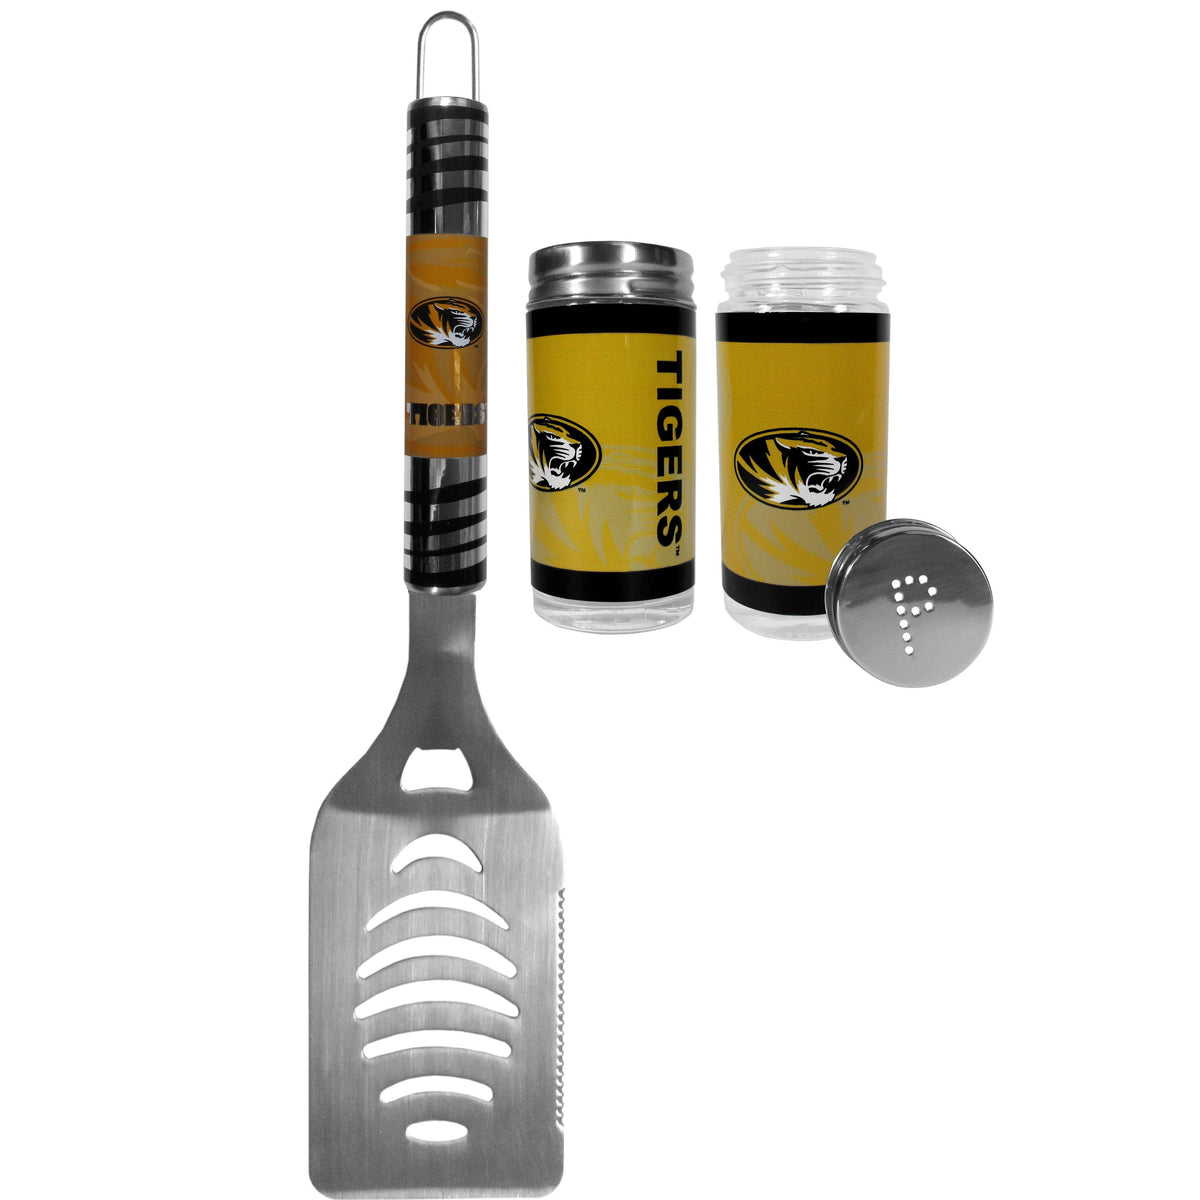 Missouri Tigers Tailgater Spatula and Salt and Pepper Shakers - Flyclothing LLC